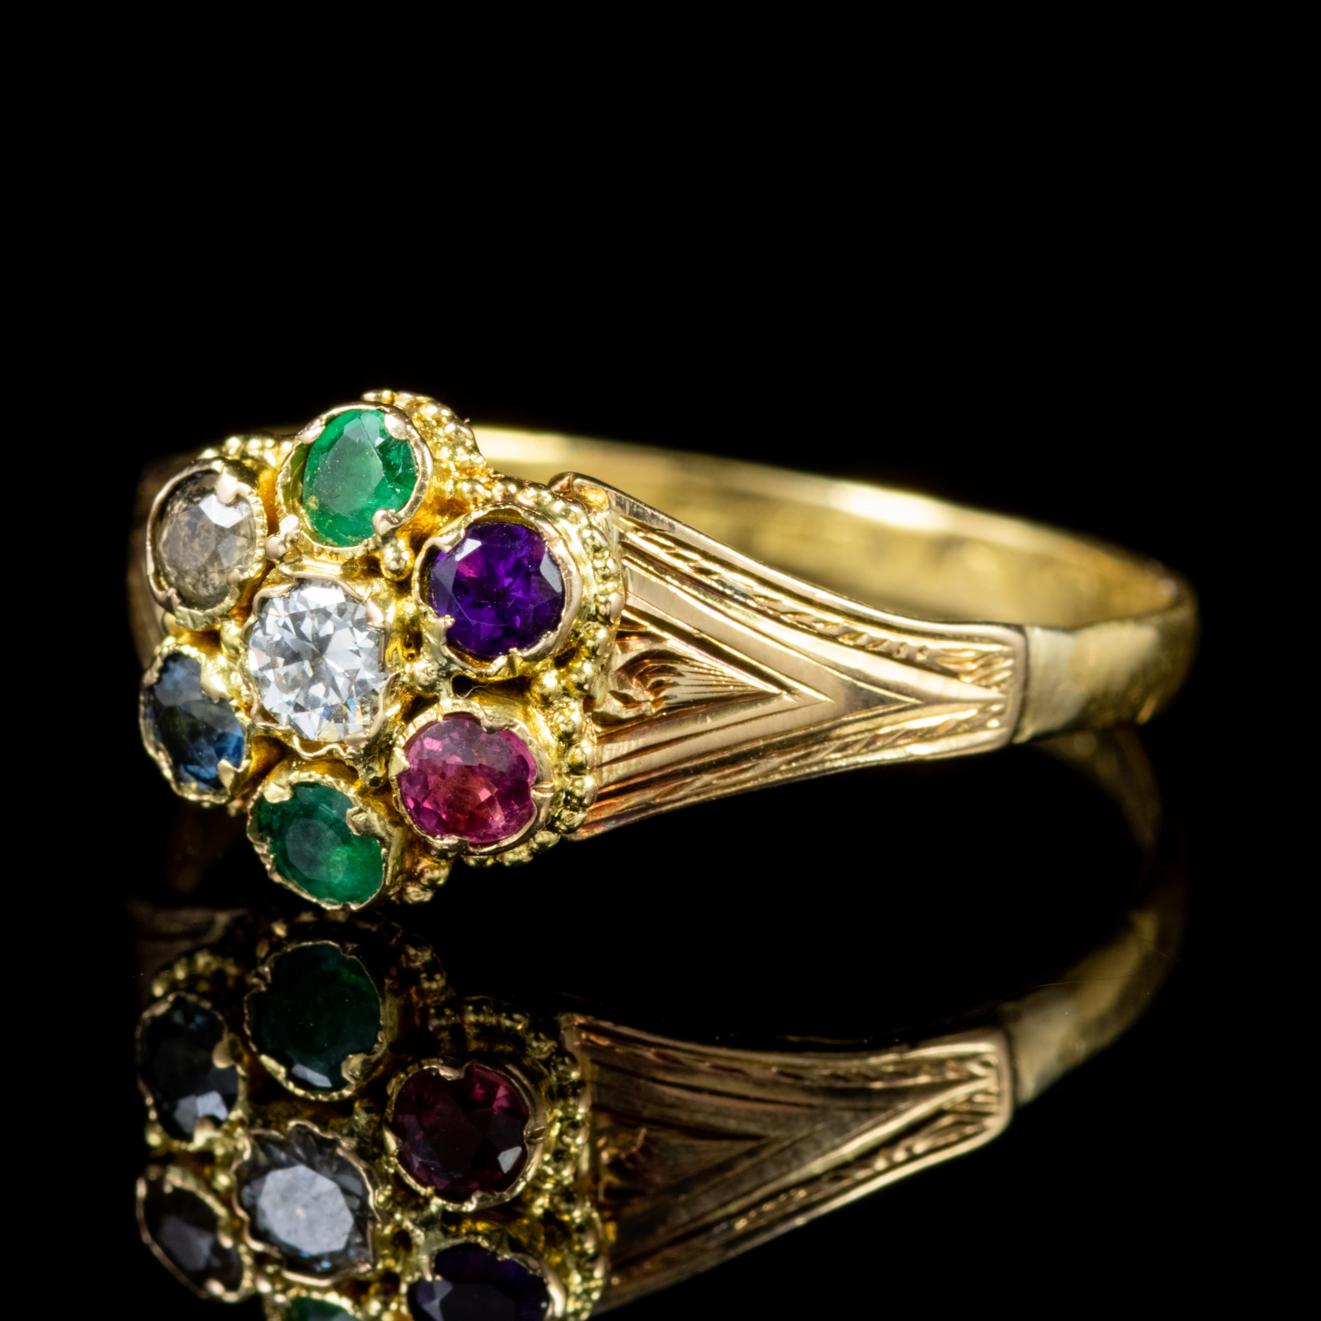 A fabulous antique Victorian sentiment ring crowned with a cluster of colourful gemstones that spell out the word ‘Dearest’ with each first letter of the stone – Diamond, Emerald, Amethyst, Ruby, Emerald, Sapphire, Topaz.

Sentiment rings or DEAREST